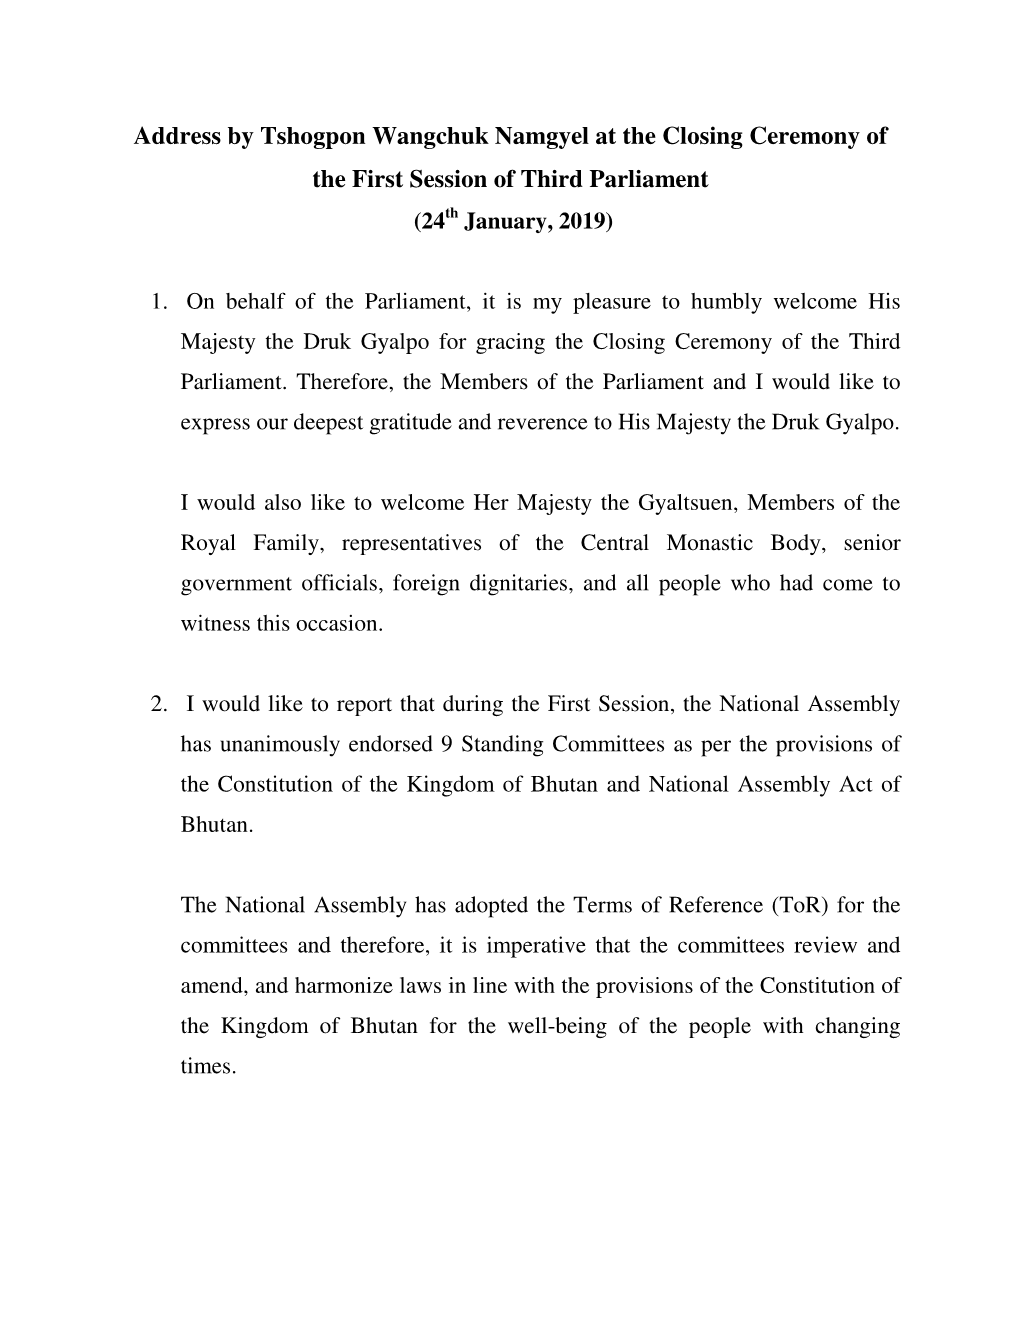 Address by Tshogpon Wangchuk Namgyel at the Closing Ceremony of the First Session of Third Parliament (24 Th January, 2019)